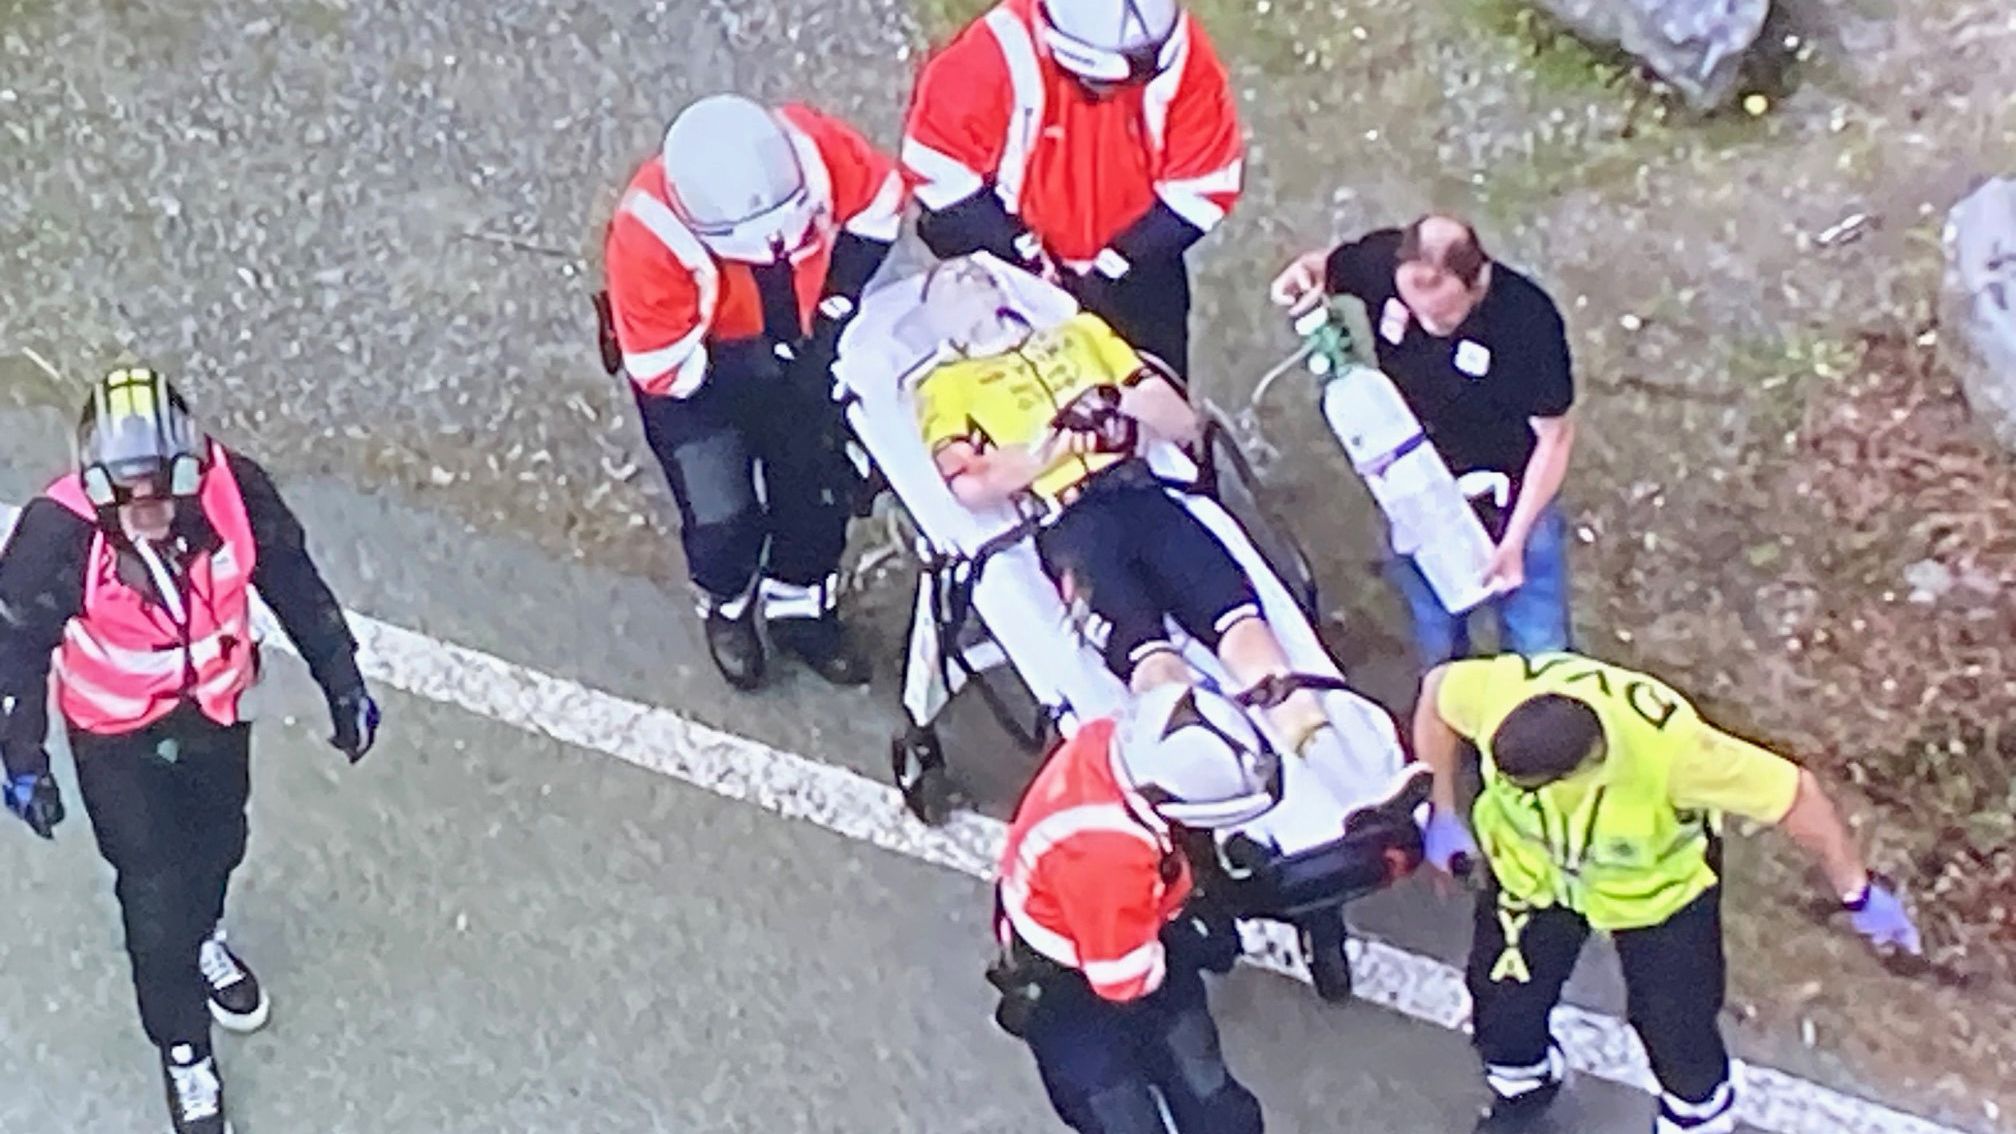 'Sad day' as reigning Tour de France champ, Olympic gold medallist caught in horror crash